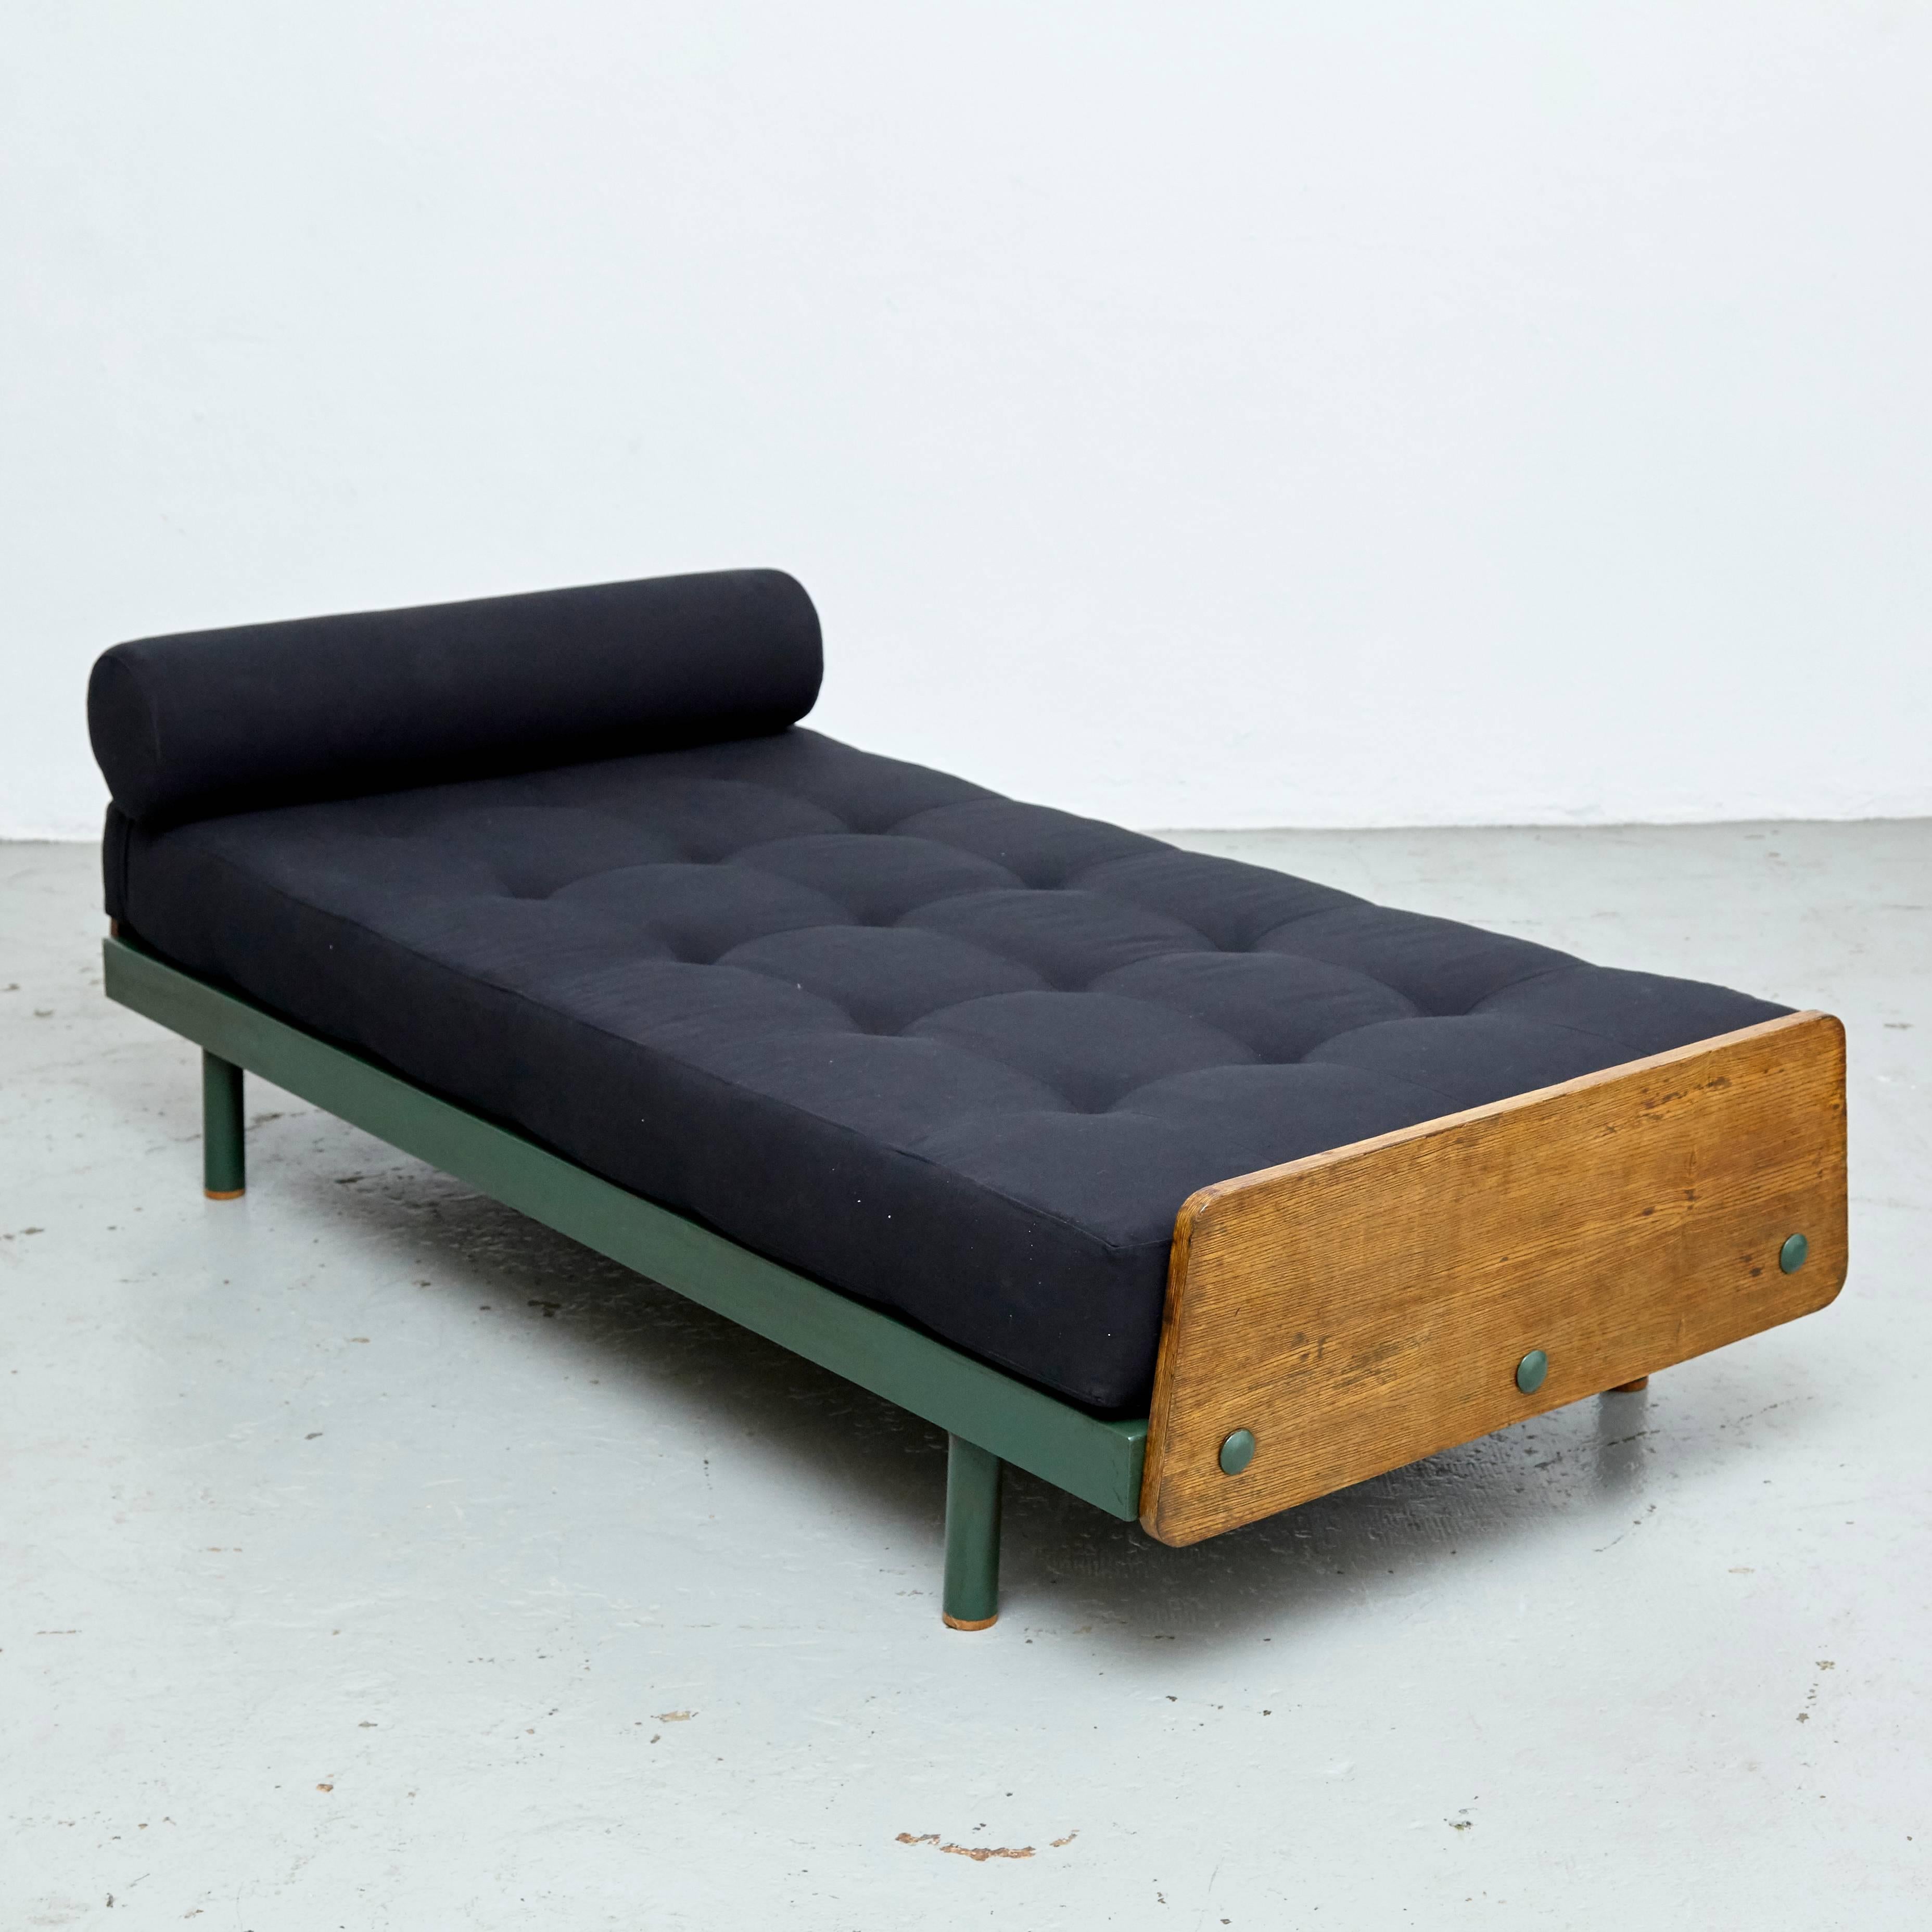 French Jean Prouve S.C.A.L. Daybed, circa 1950